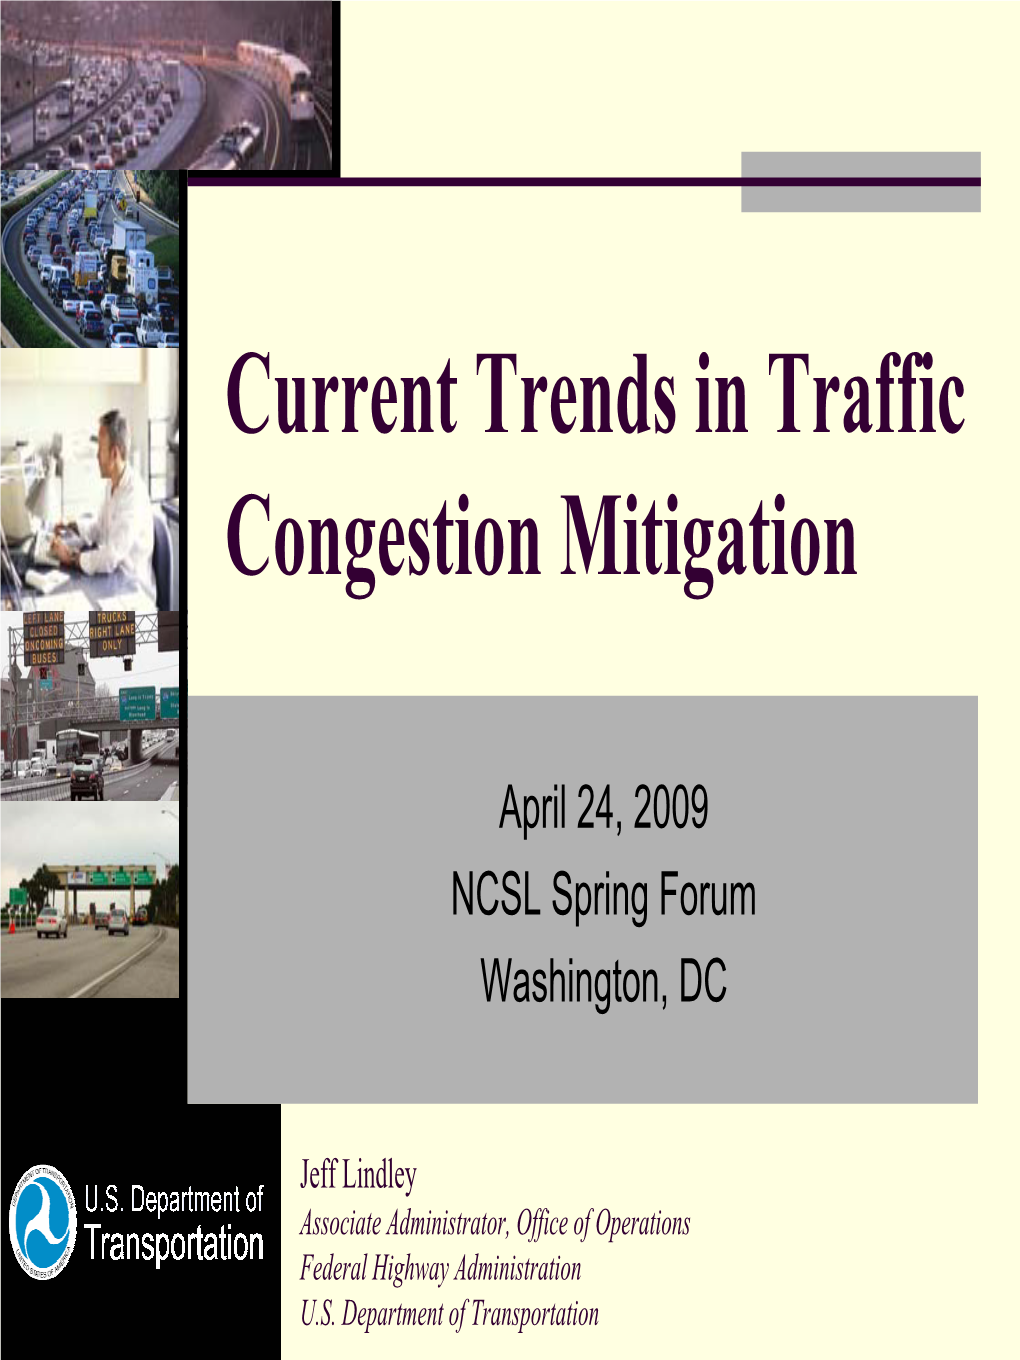 Current Trends in Traffic Congestion Mitigation